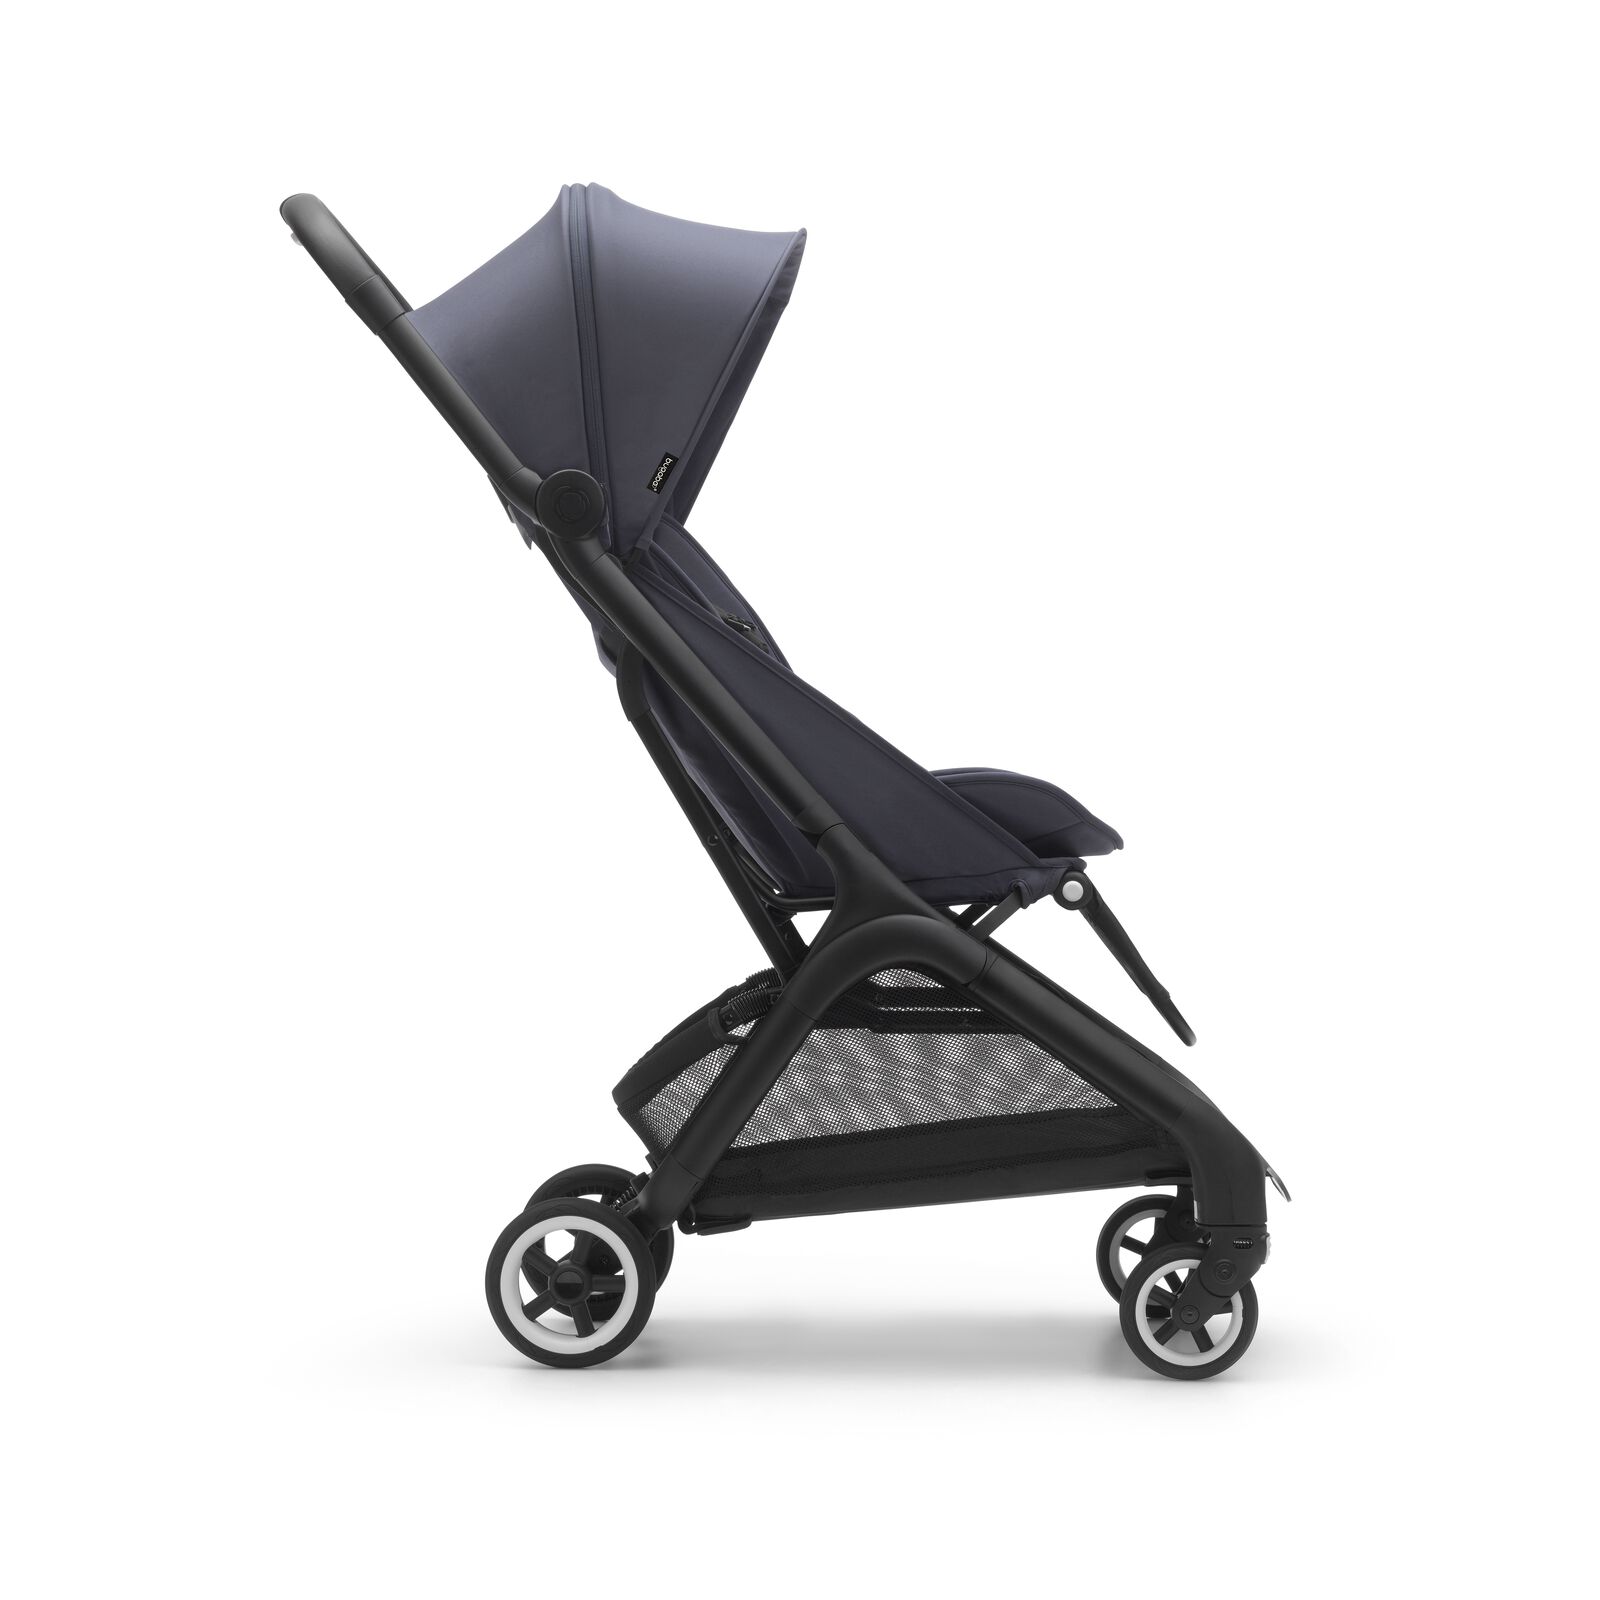 Bugaboo Butterfly seat pram - View 17